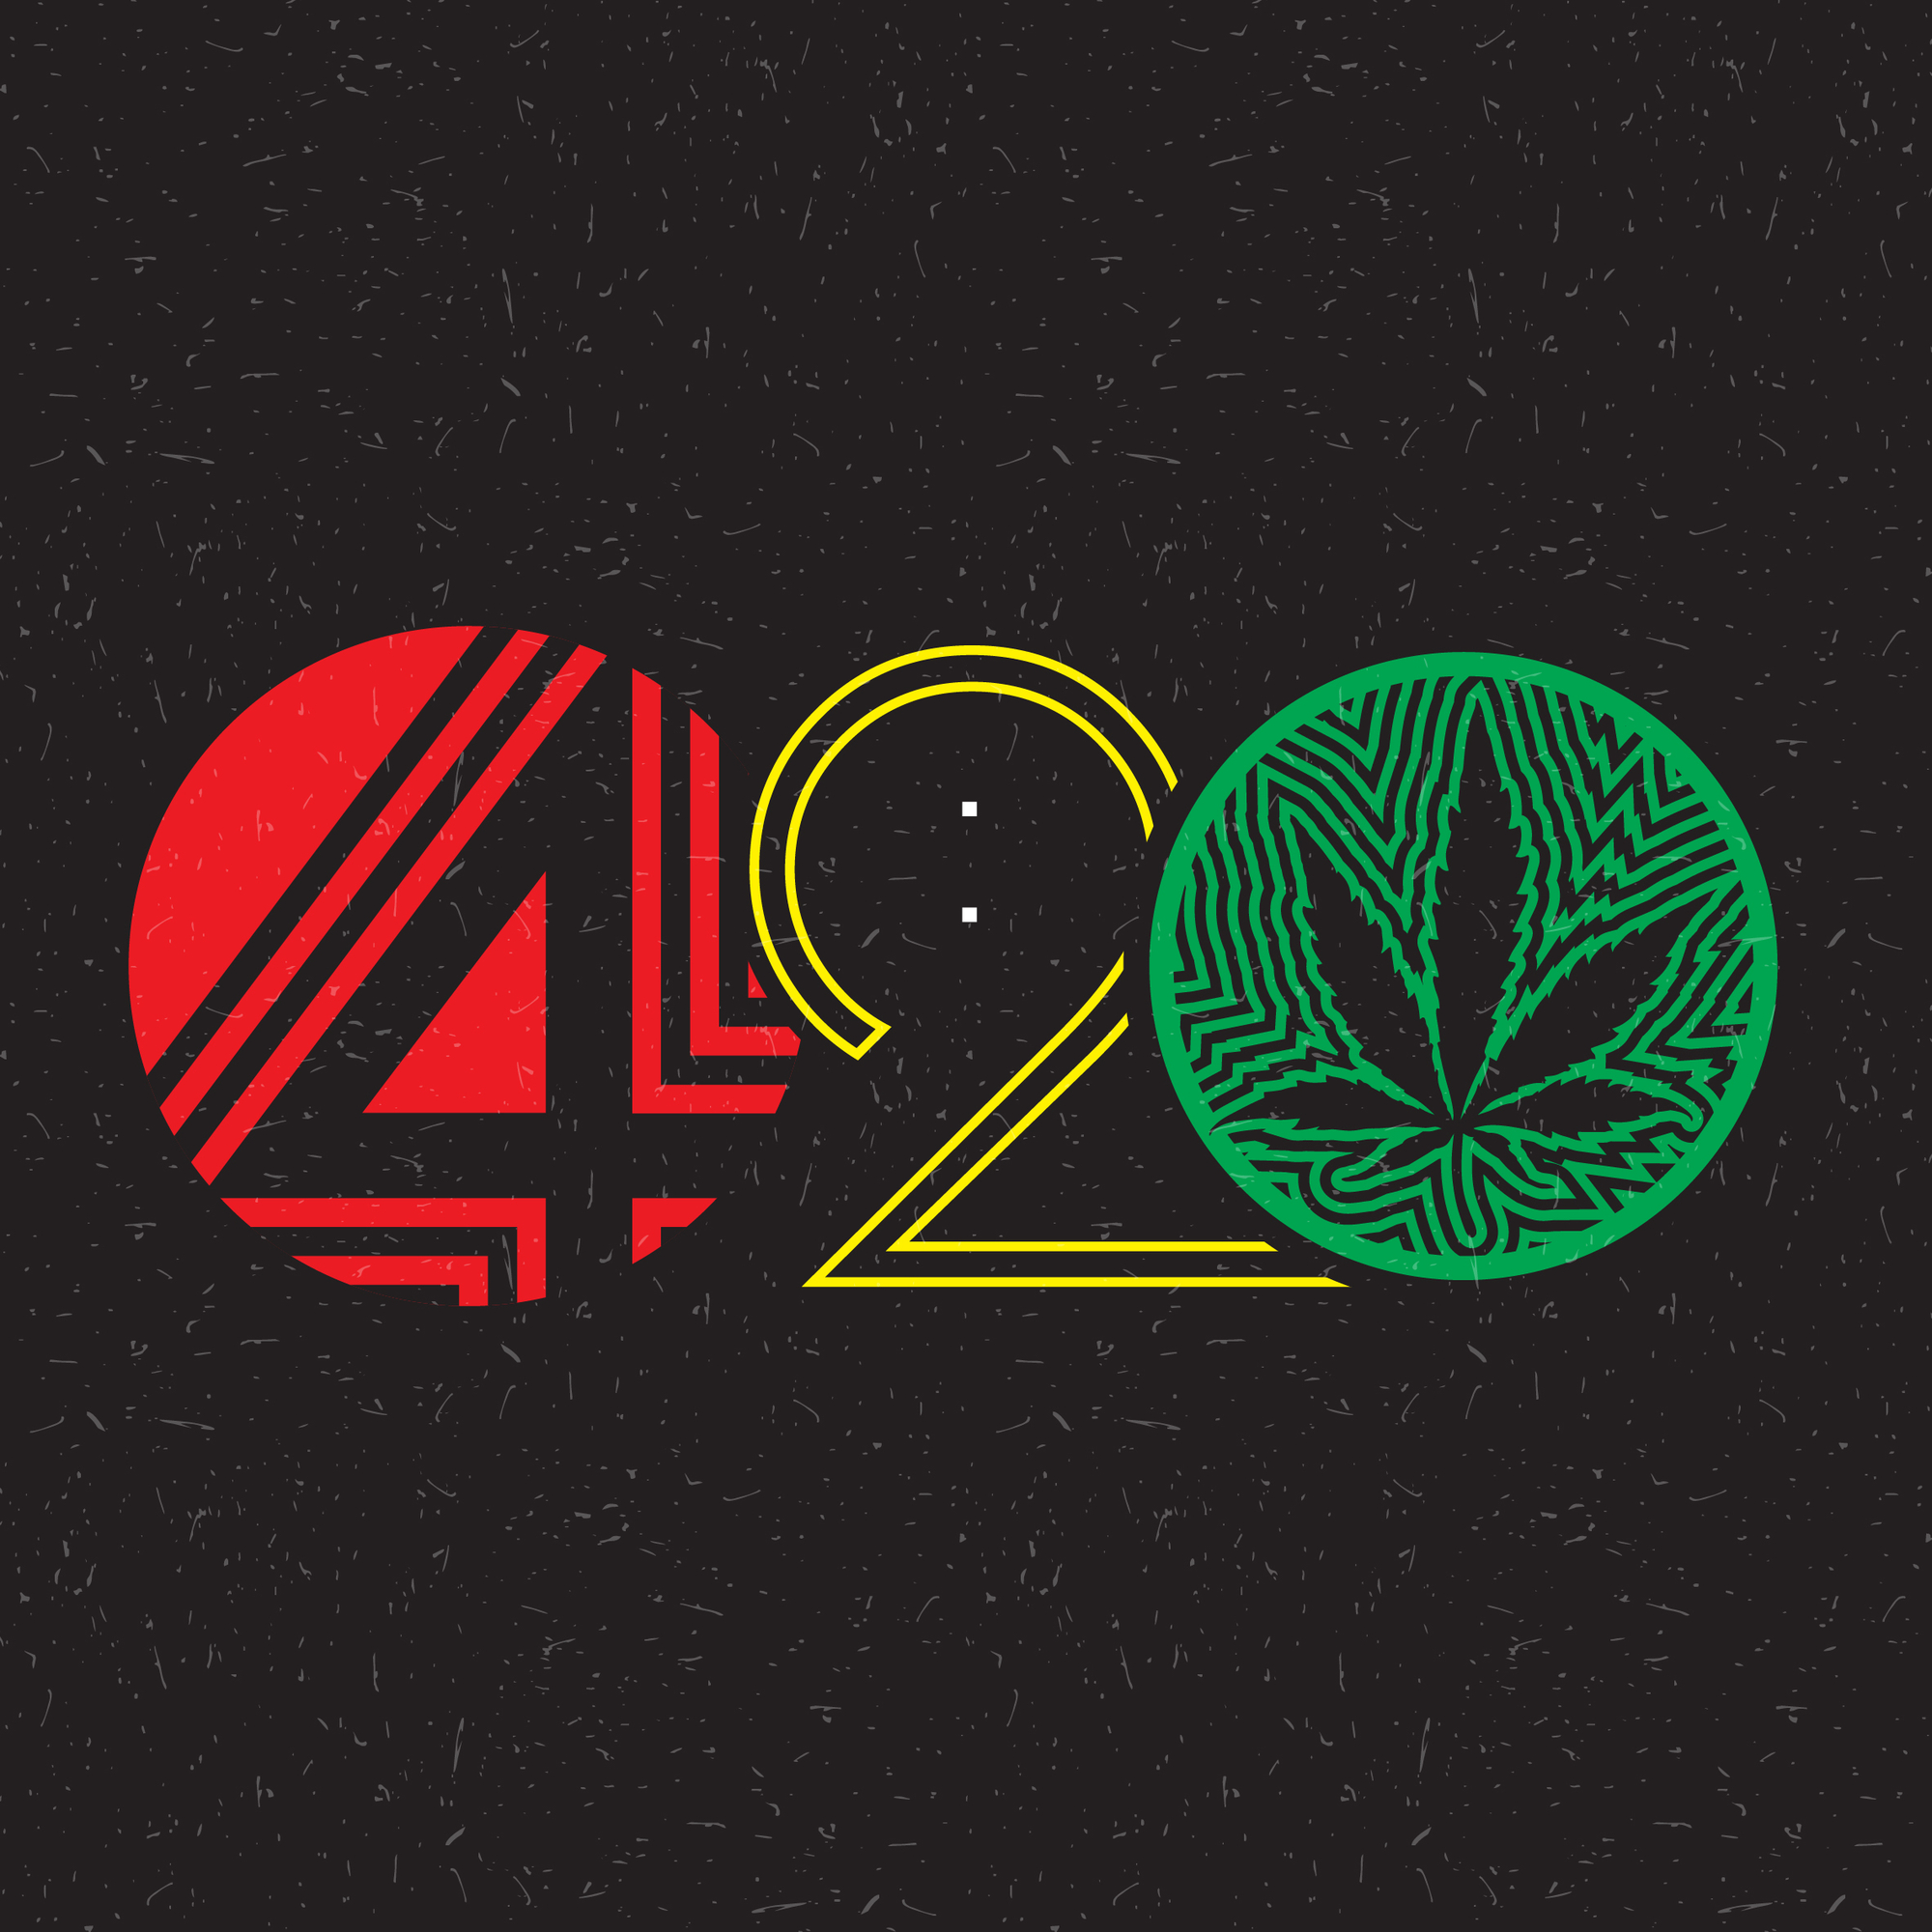 What is 420 friendly, 420 friendly means